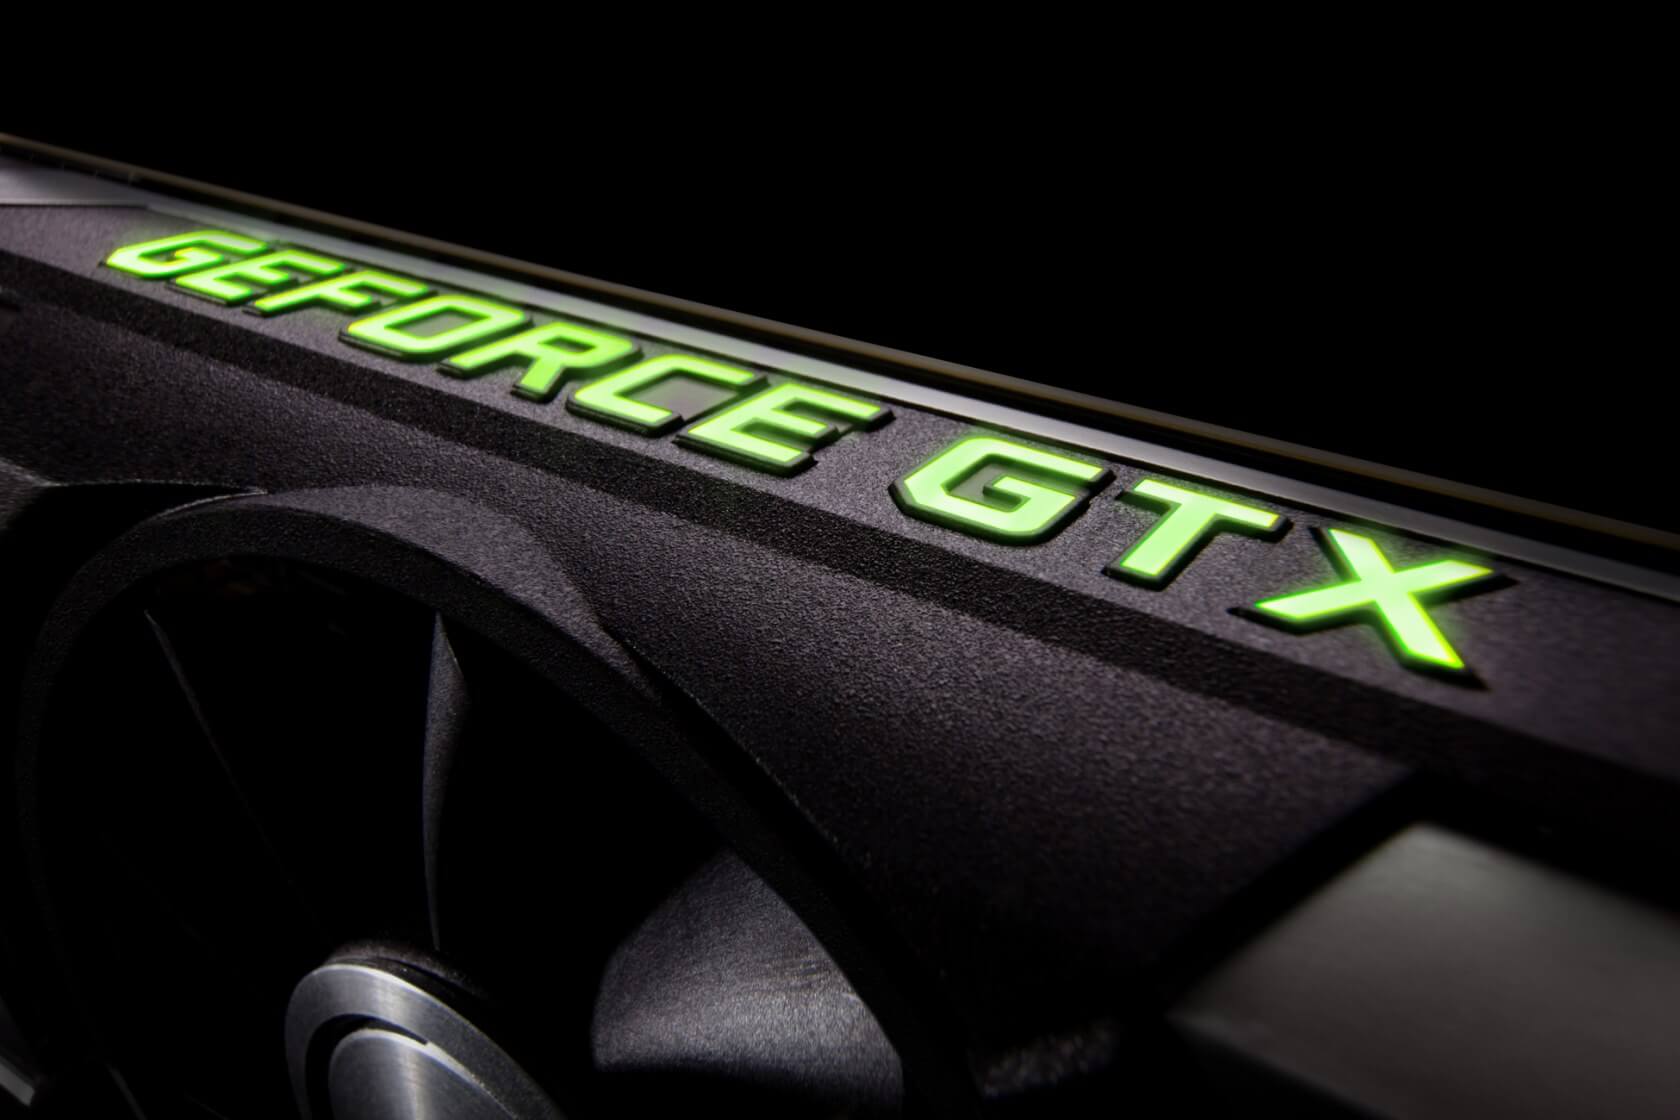 NVIDIA to launch 3 new GTX 16 series graphics cards with price starting from $179